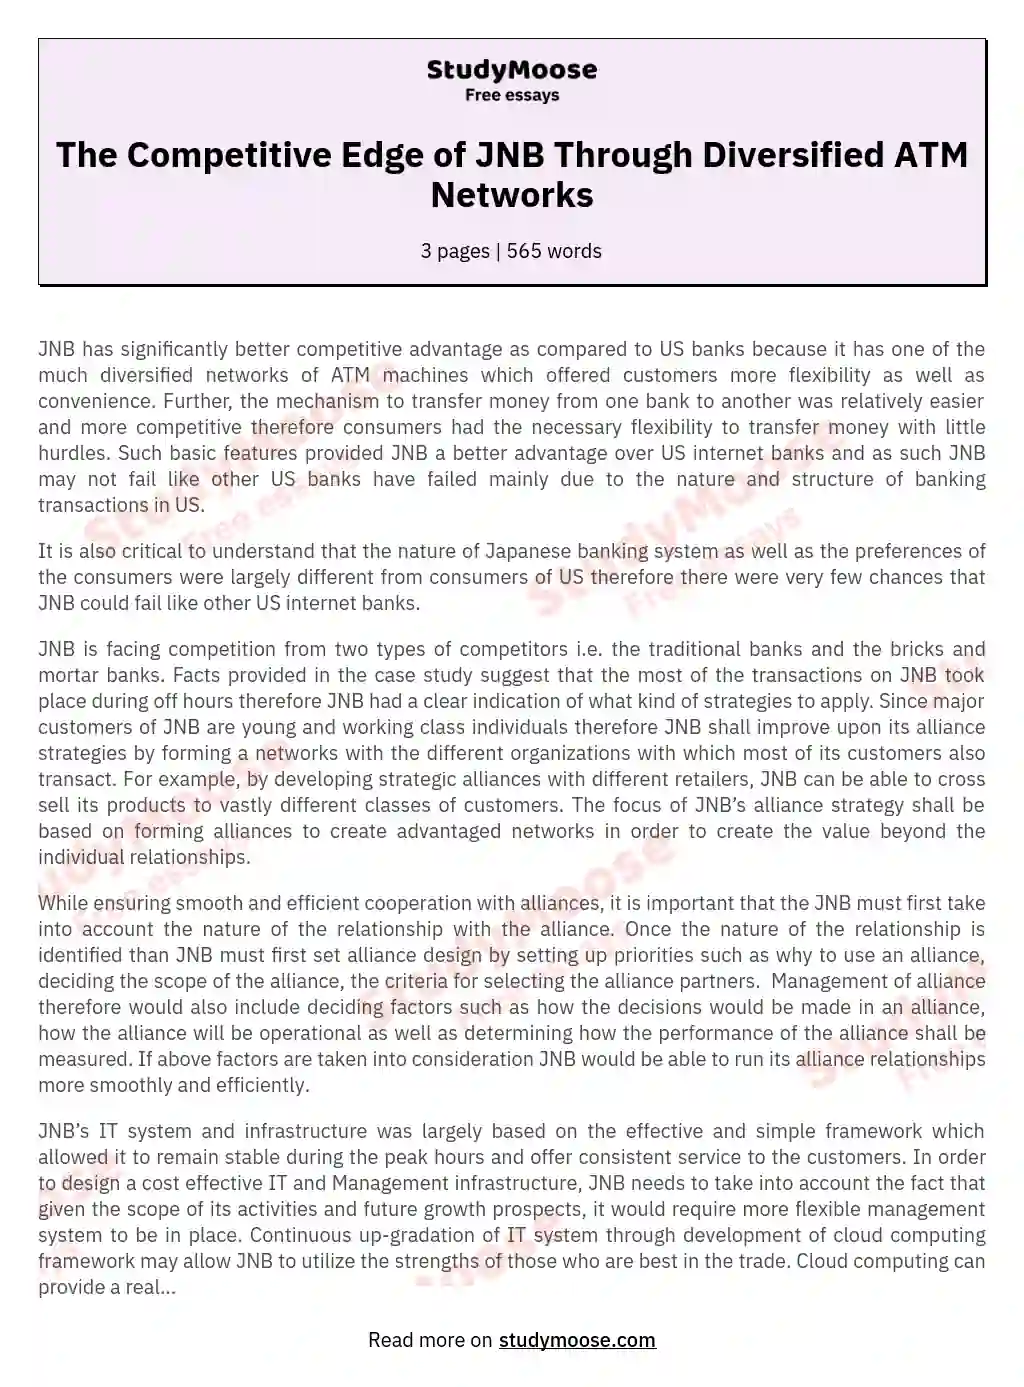 The Competitive Edge of JNB Through Diversified ATM Networks essay